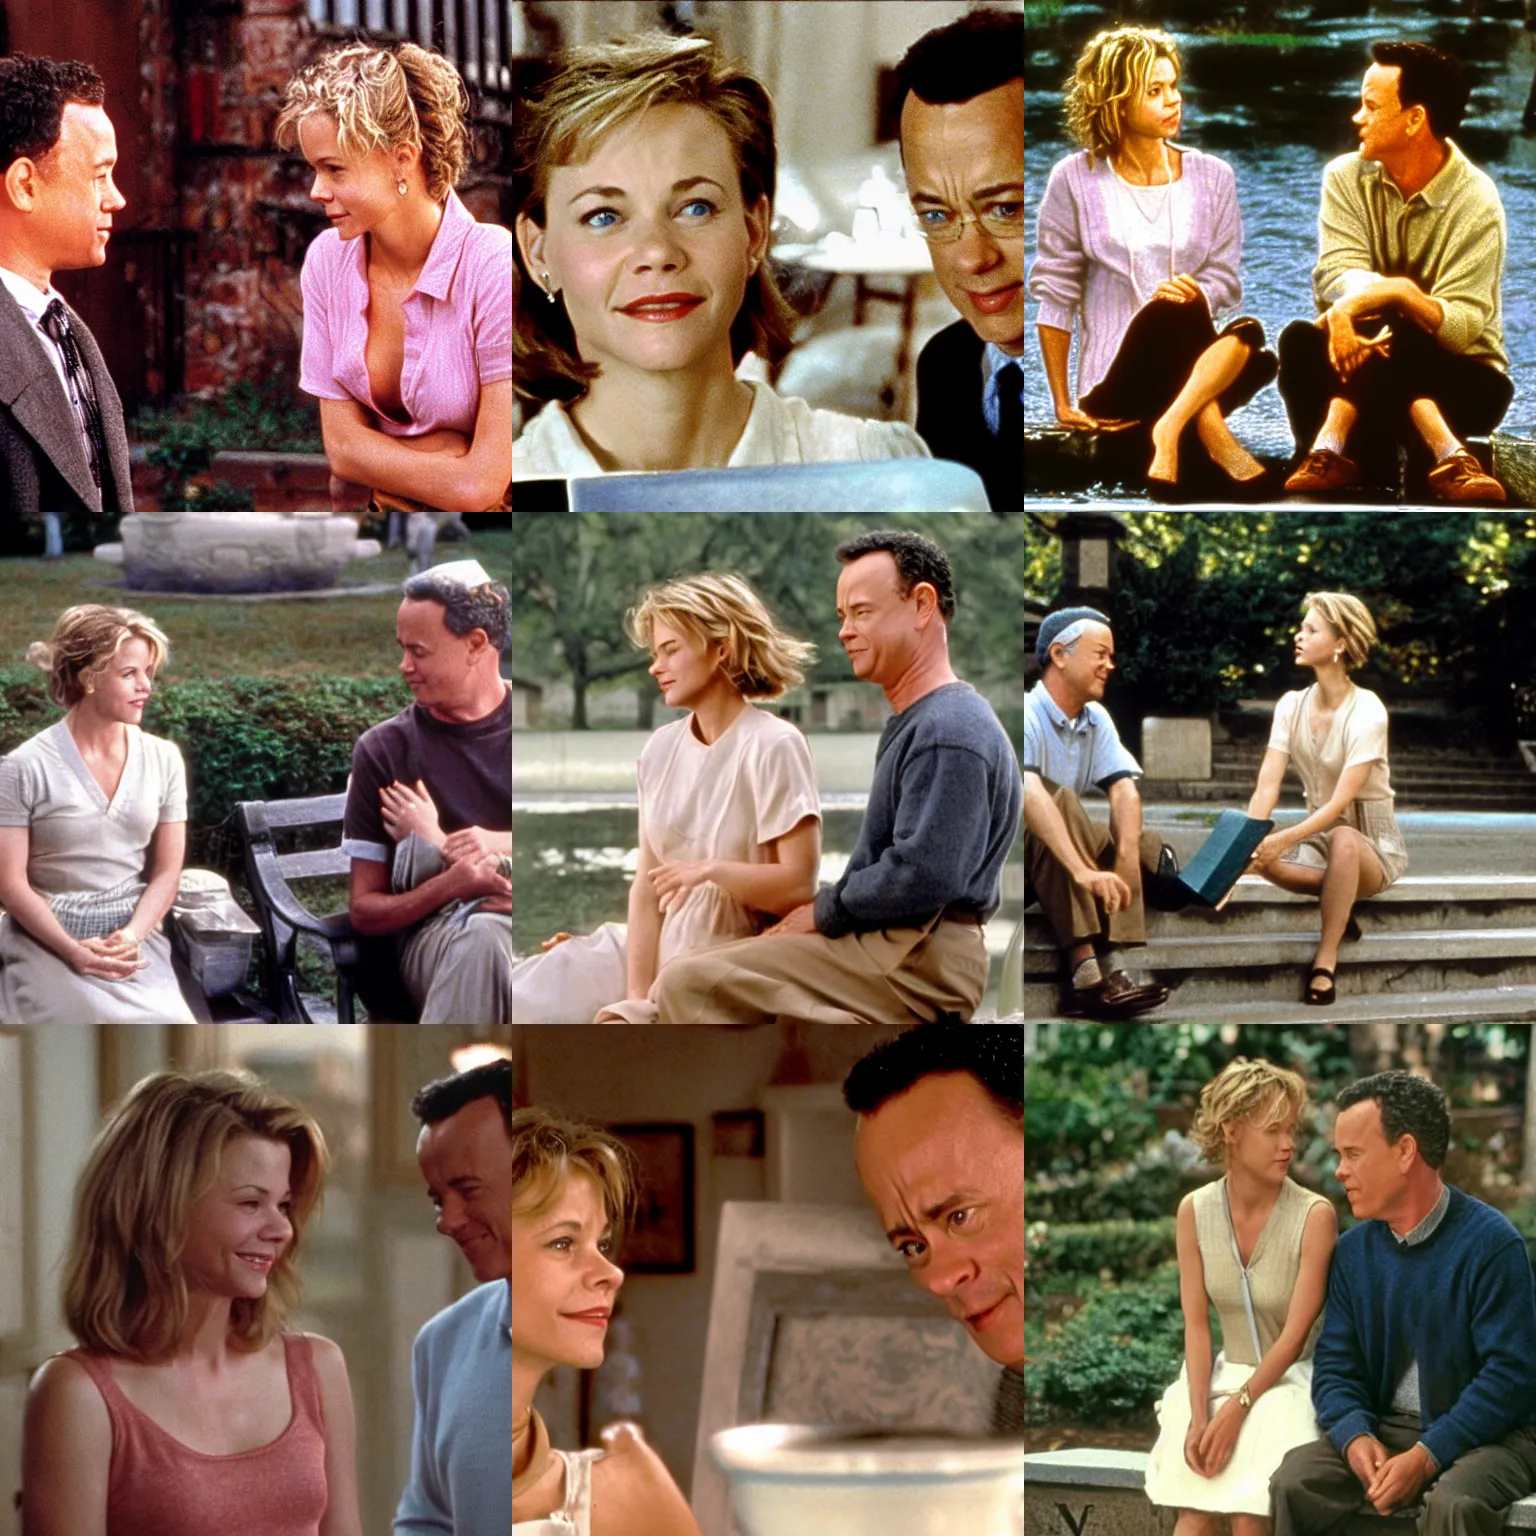 Prompt: Scene from You've got mail with Meg Ryan and Tom Hanks in the style of Leda and the Swan